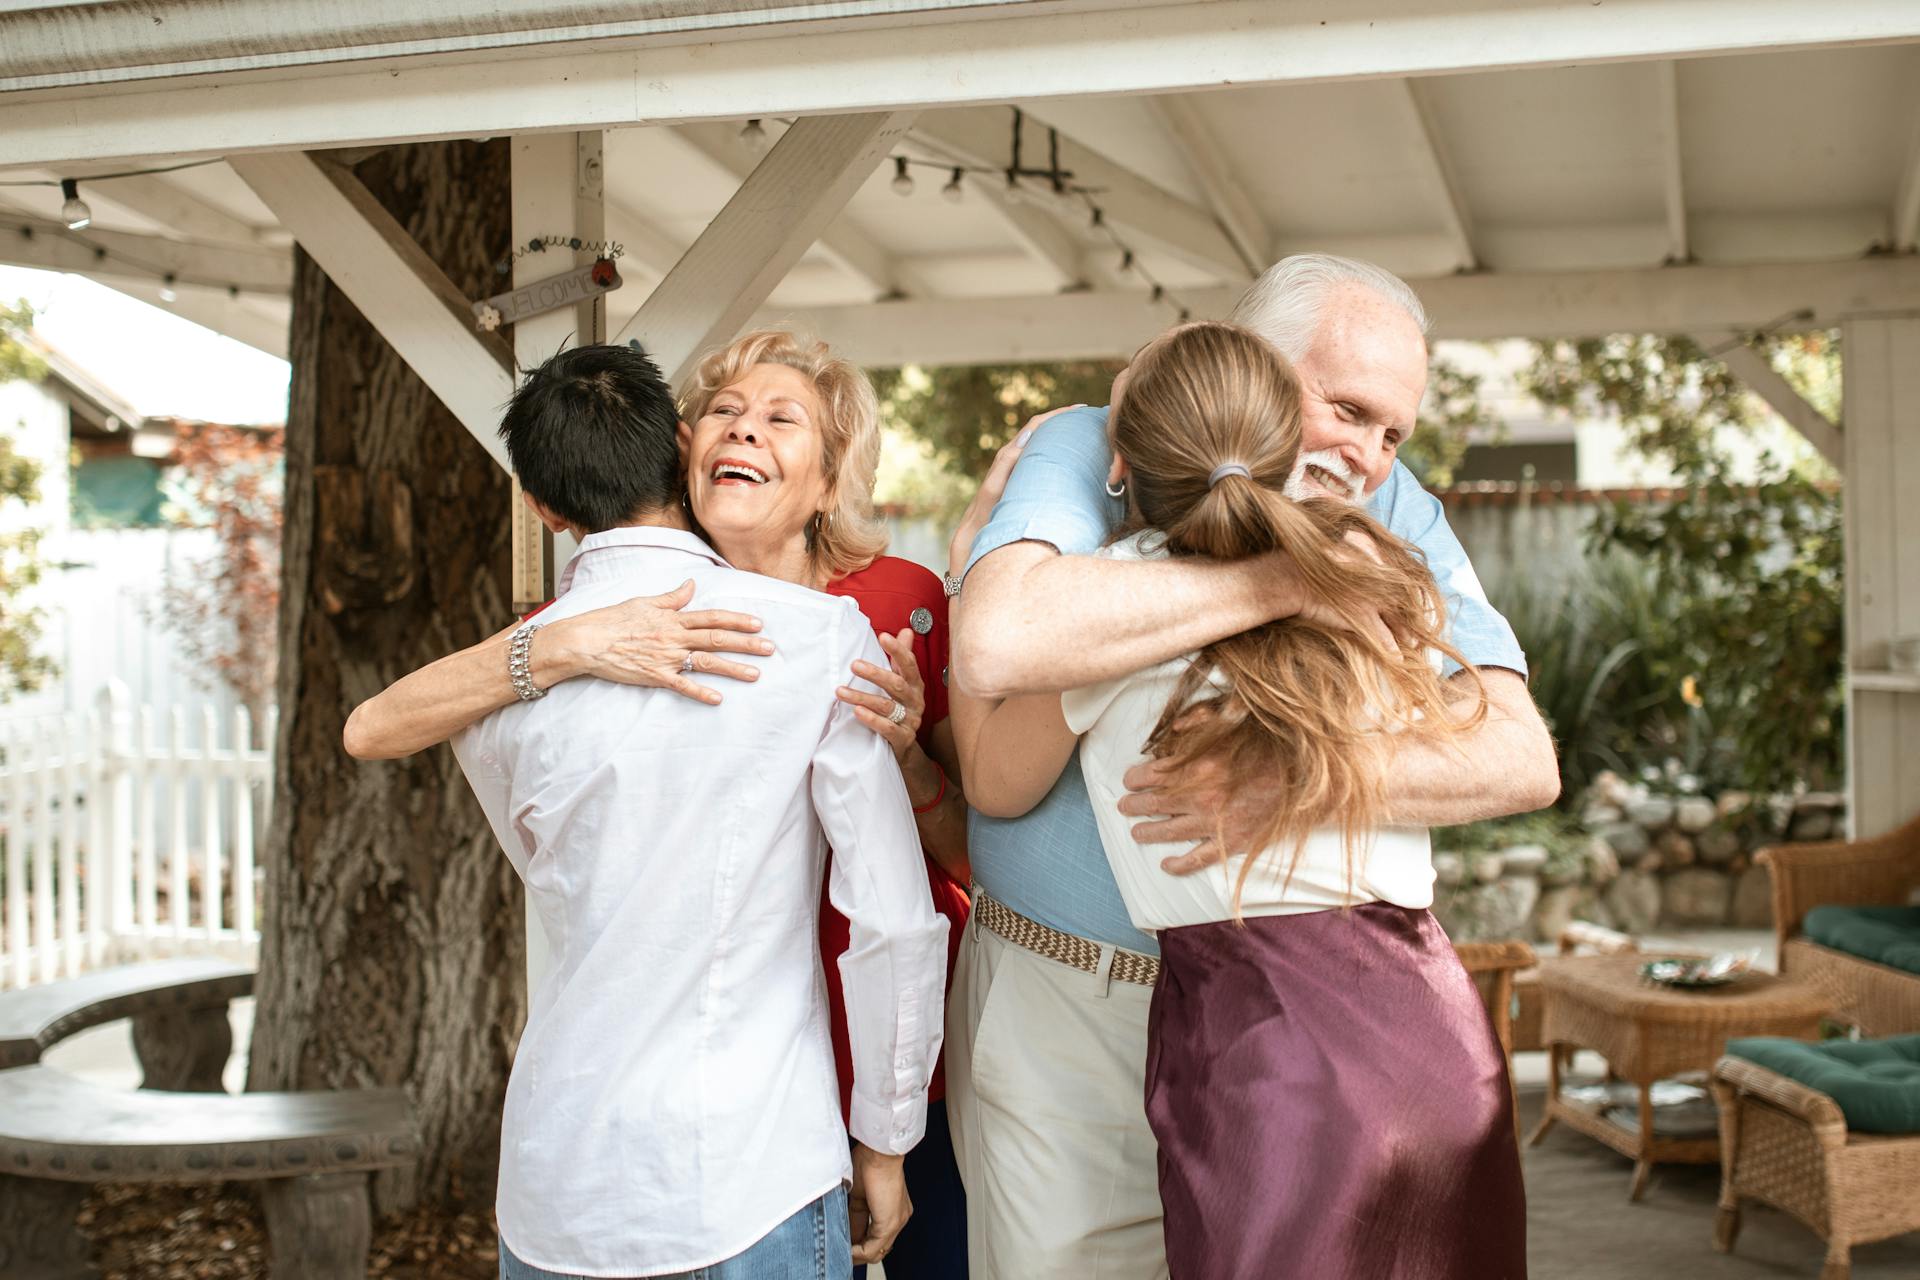 A couple with their parents | Source: Pexels